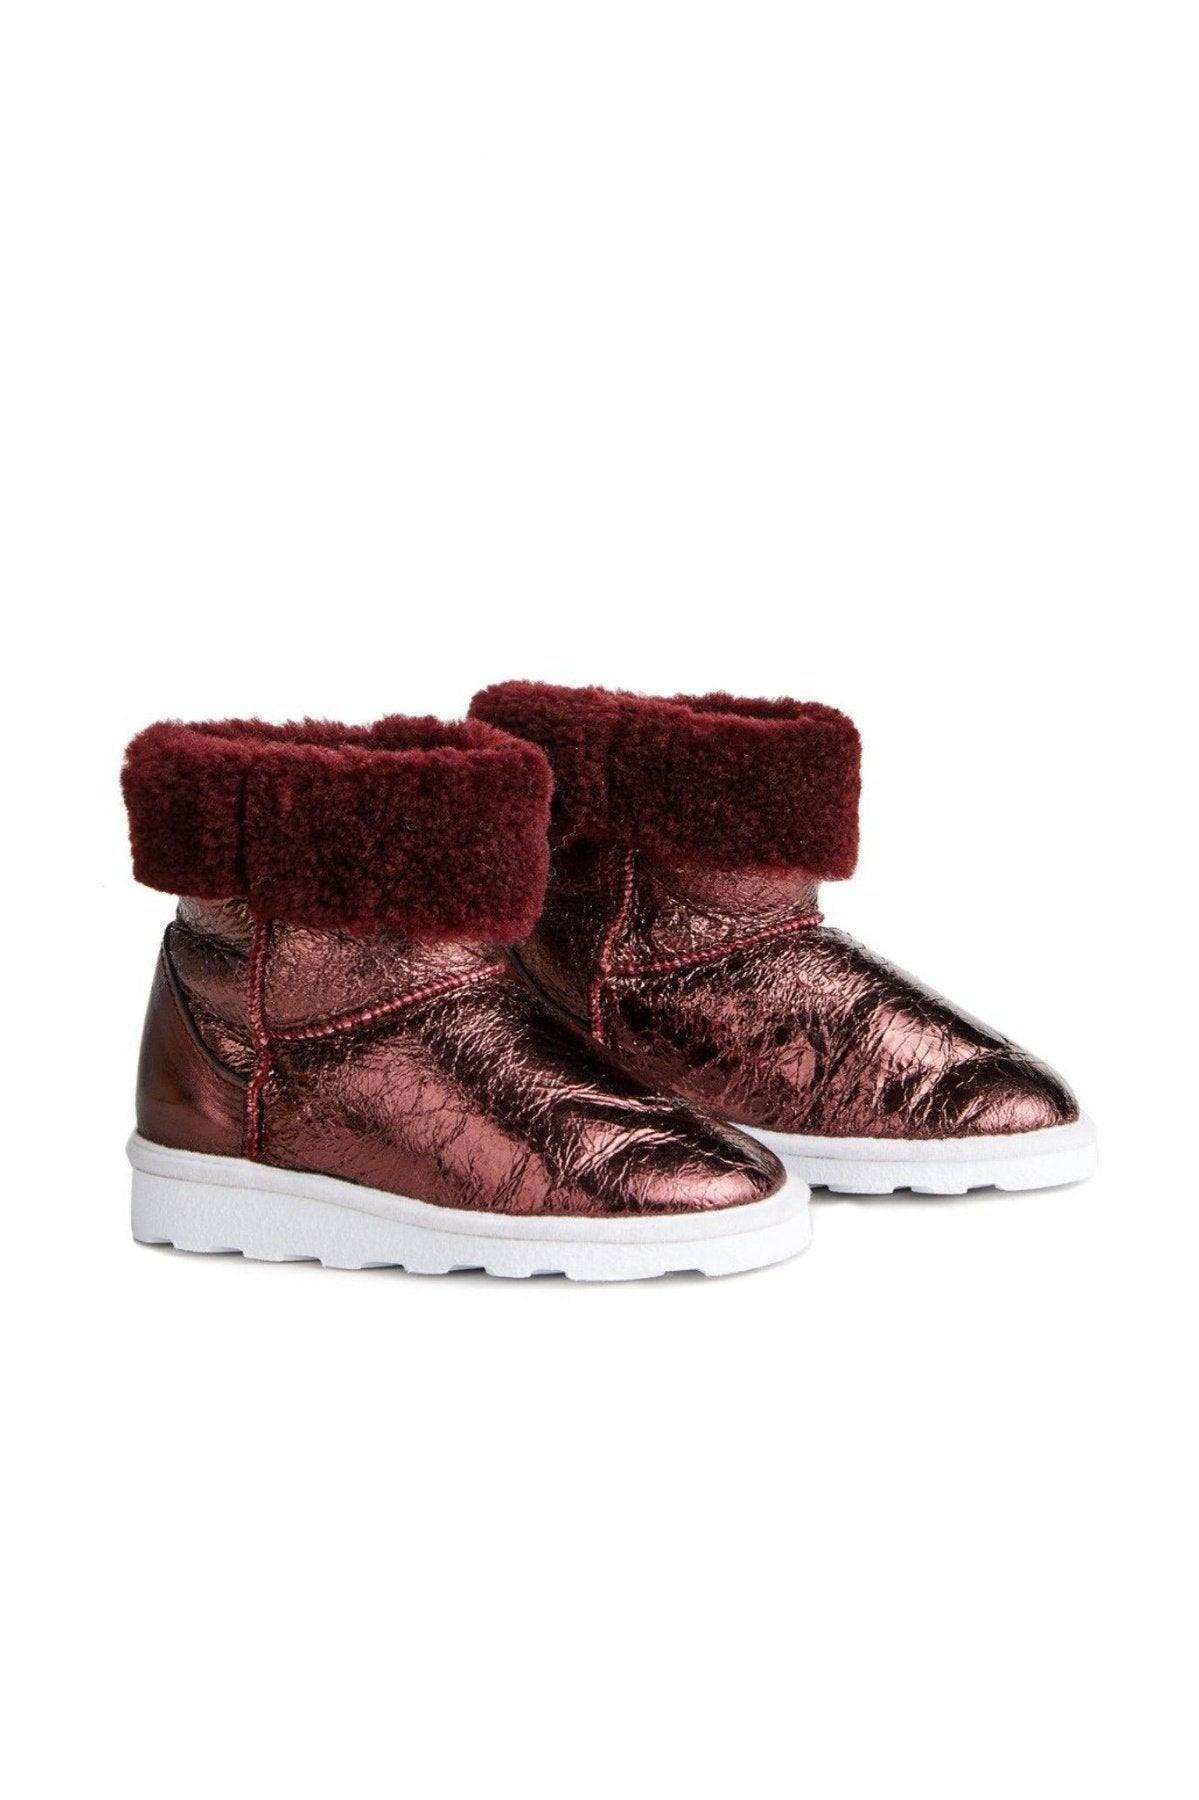 M'A KIDS LEATHER BOOTS IN BURGUNDY